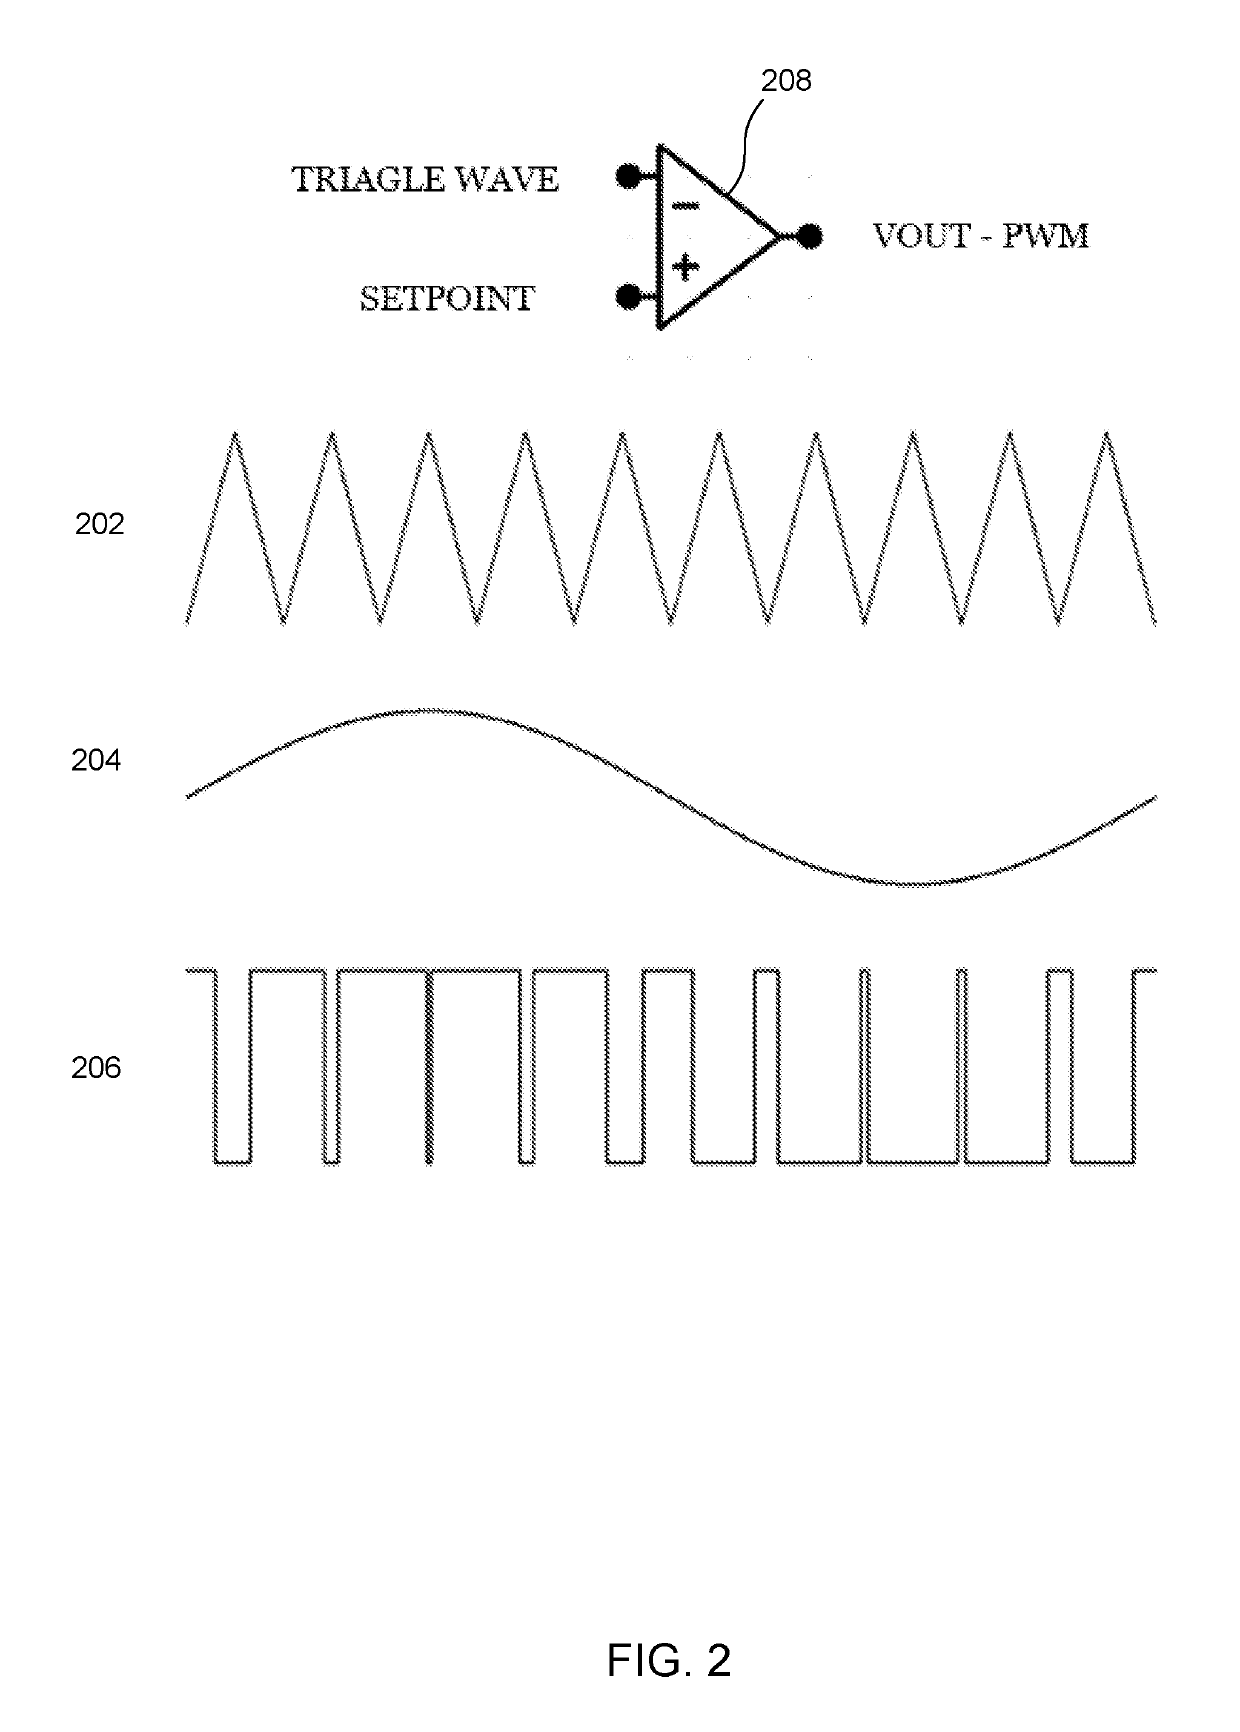 Additive synthesis of interleaved switch mode power stages for minimal delay in set point tracking